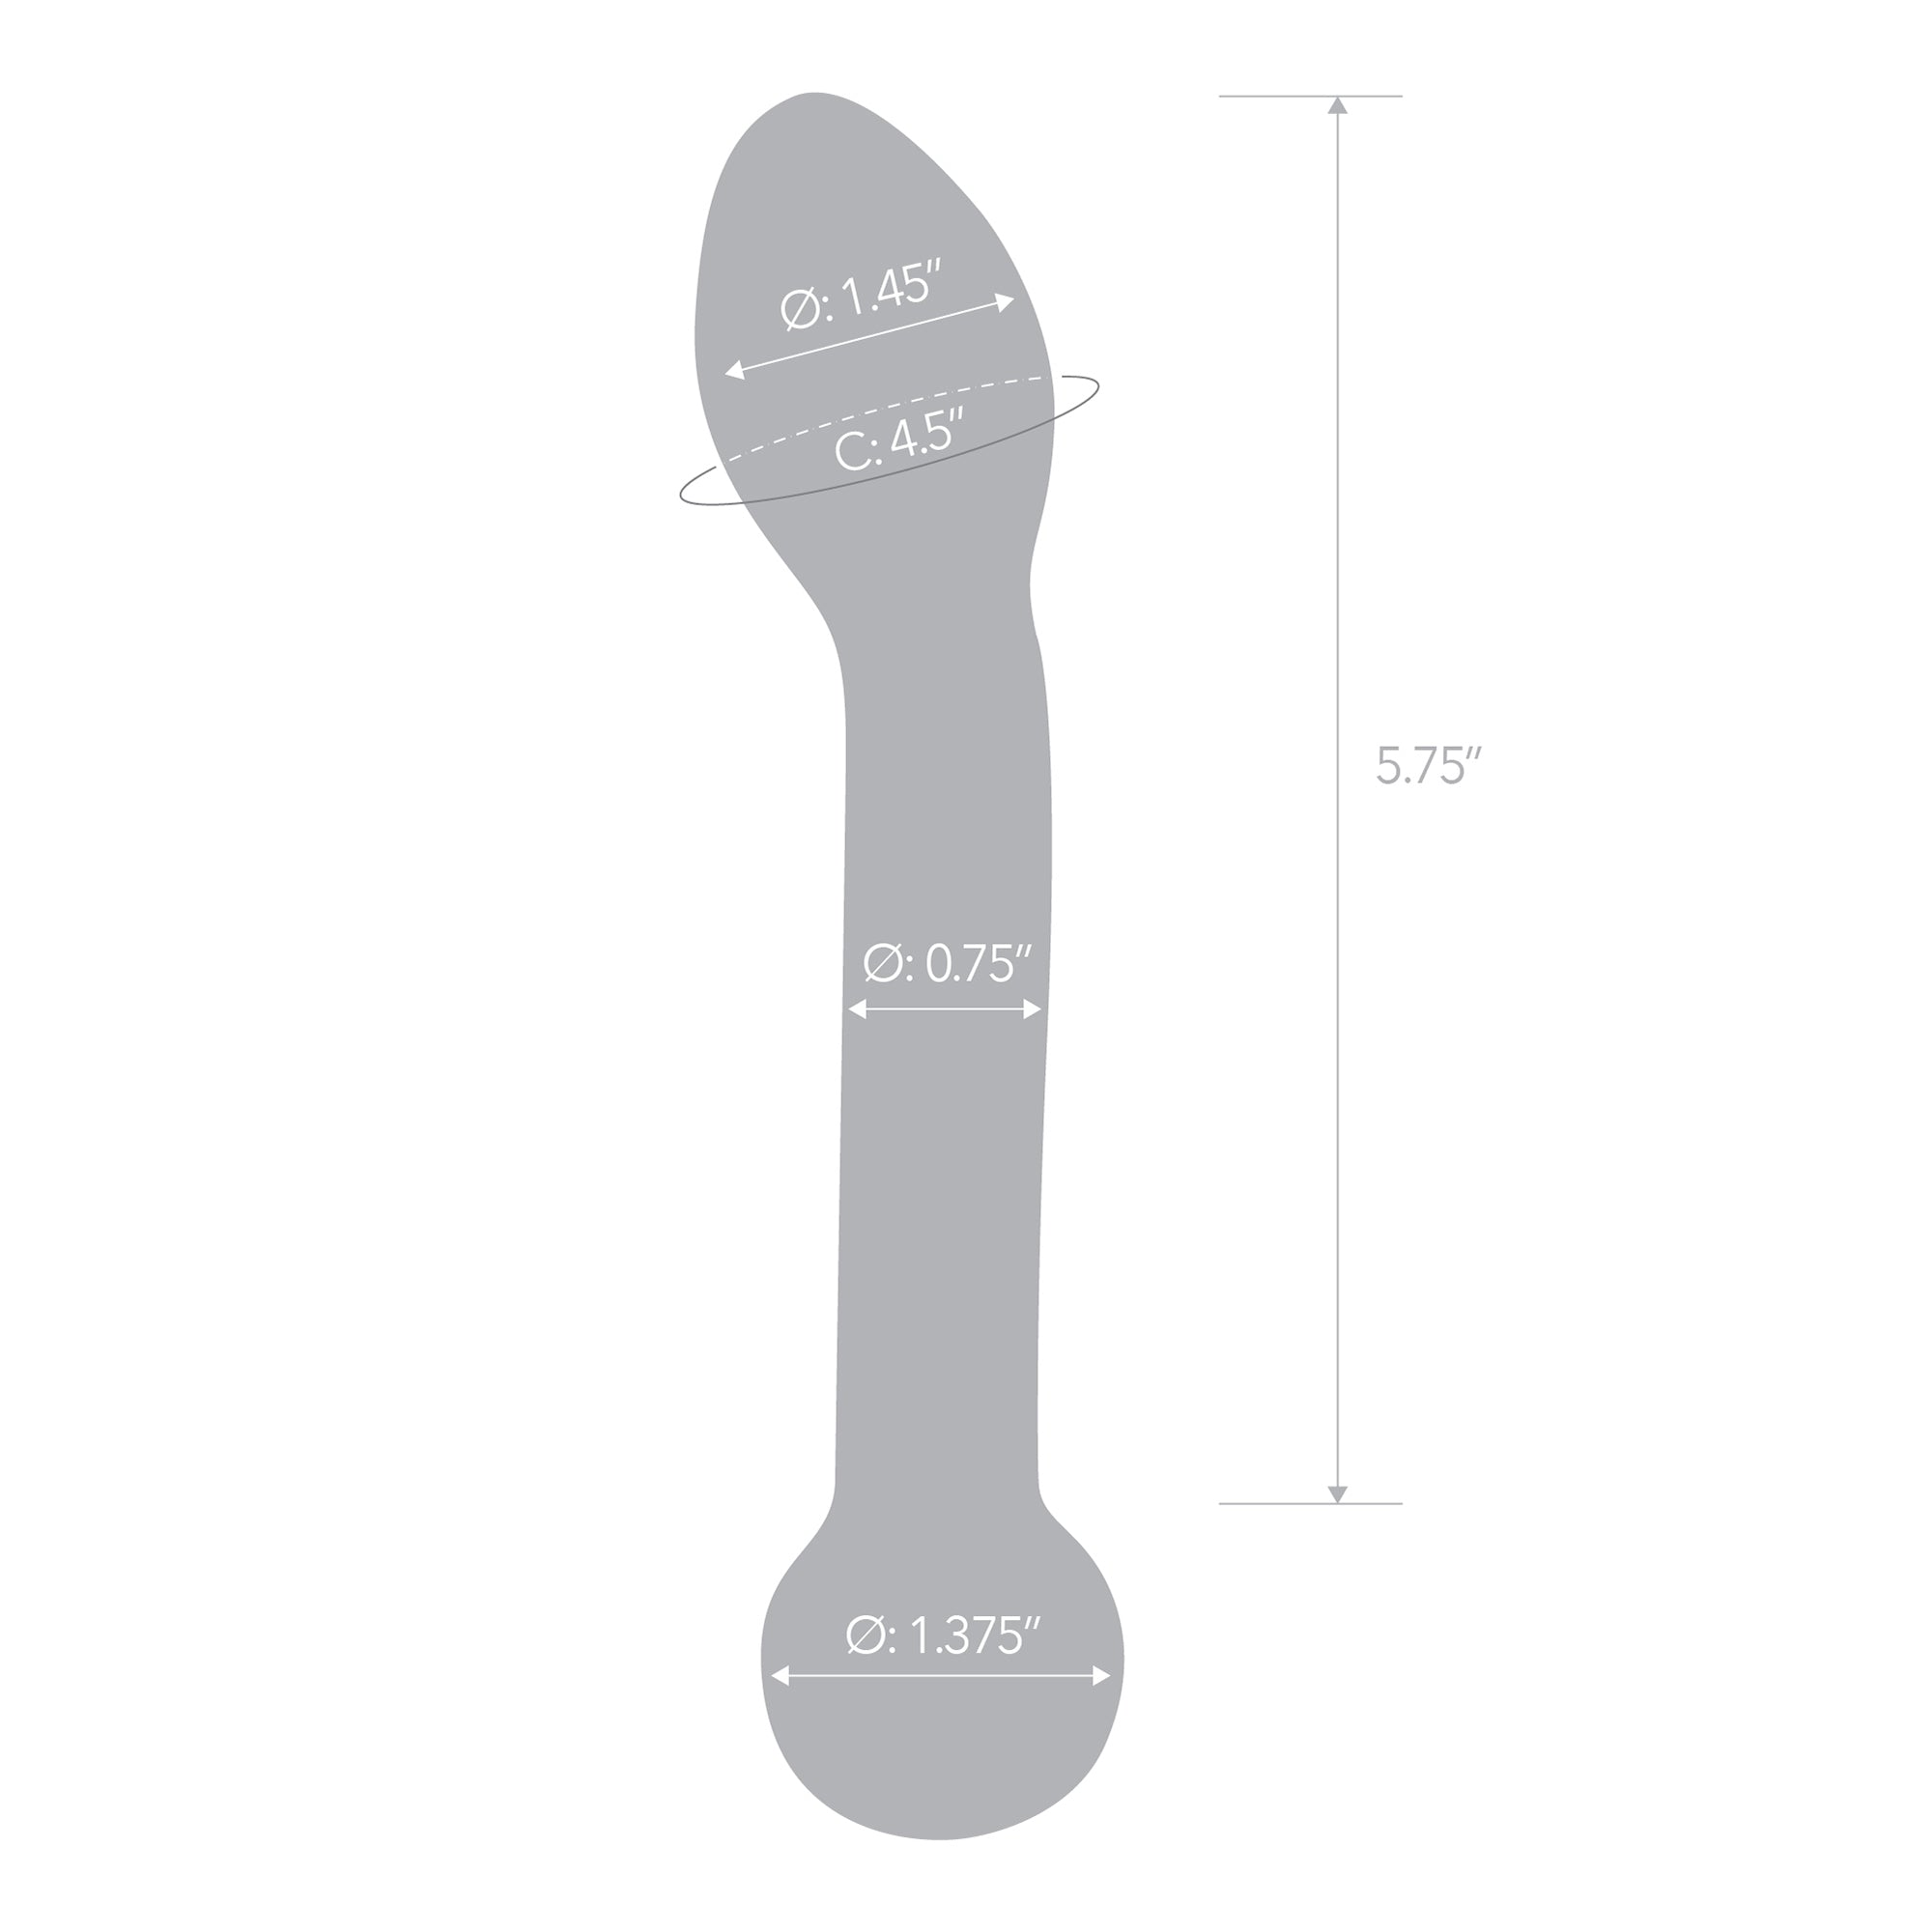 Specifications of the Gläs Honey Dripper Anal Slider Glass Anal Toy